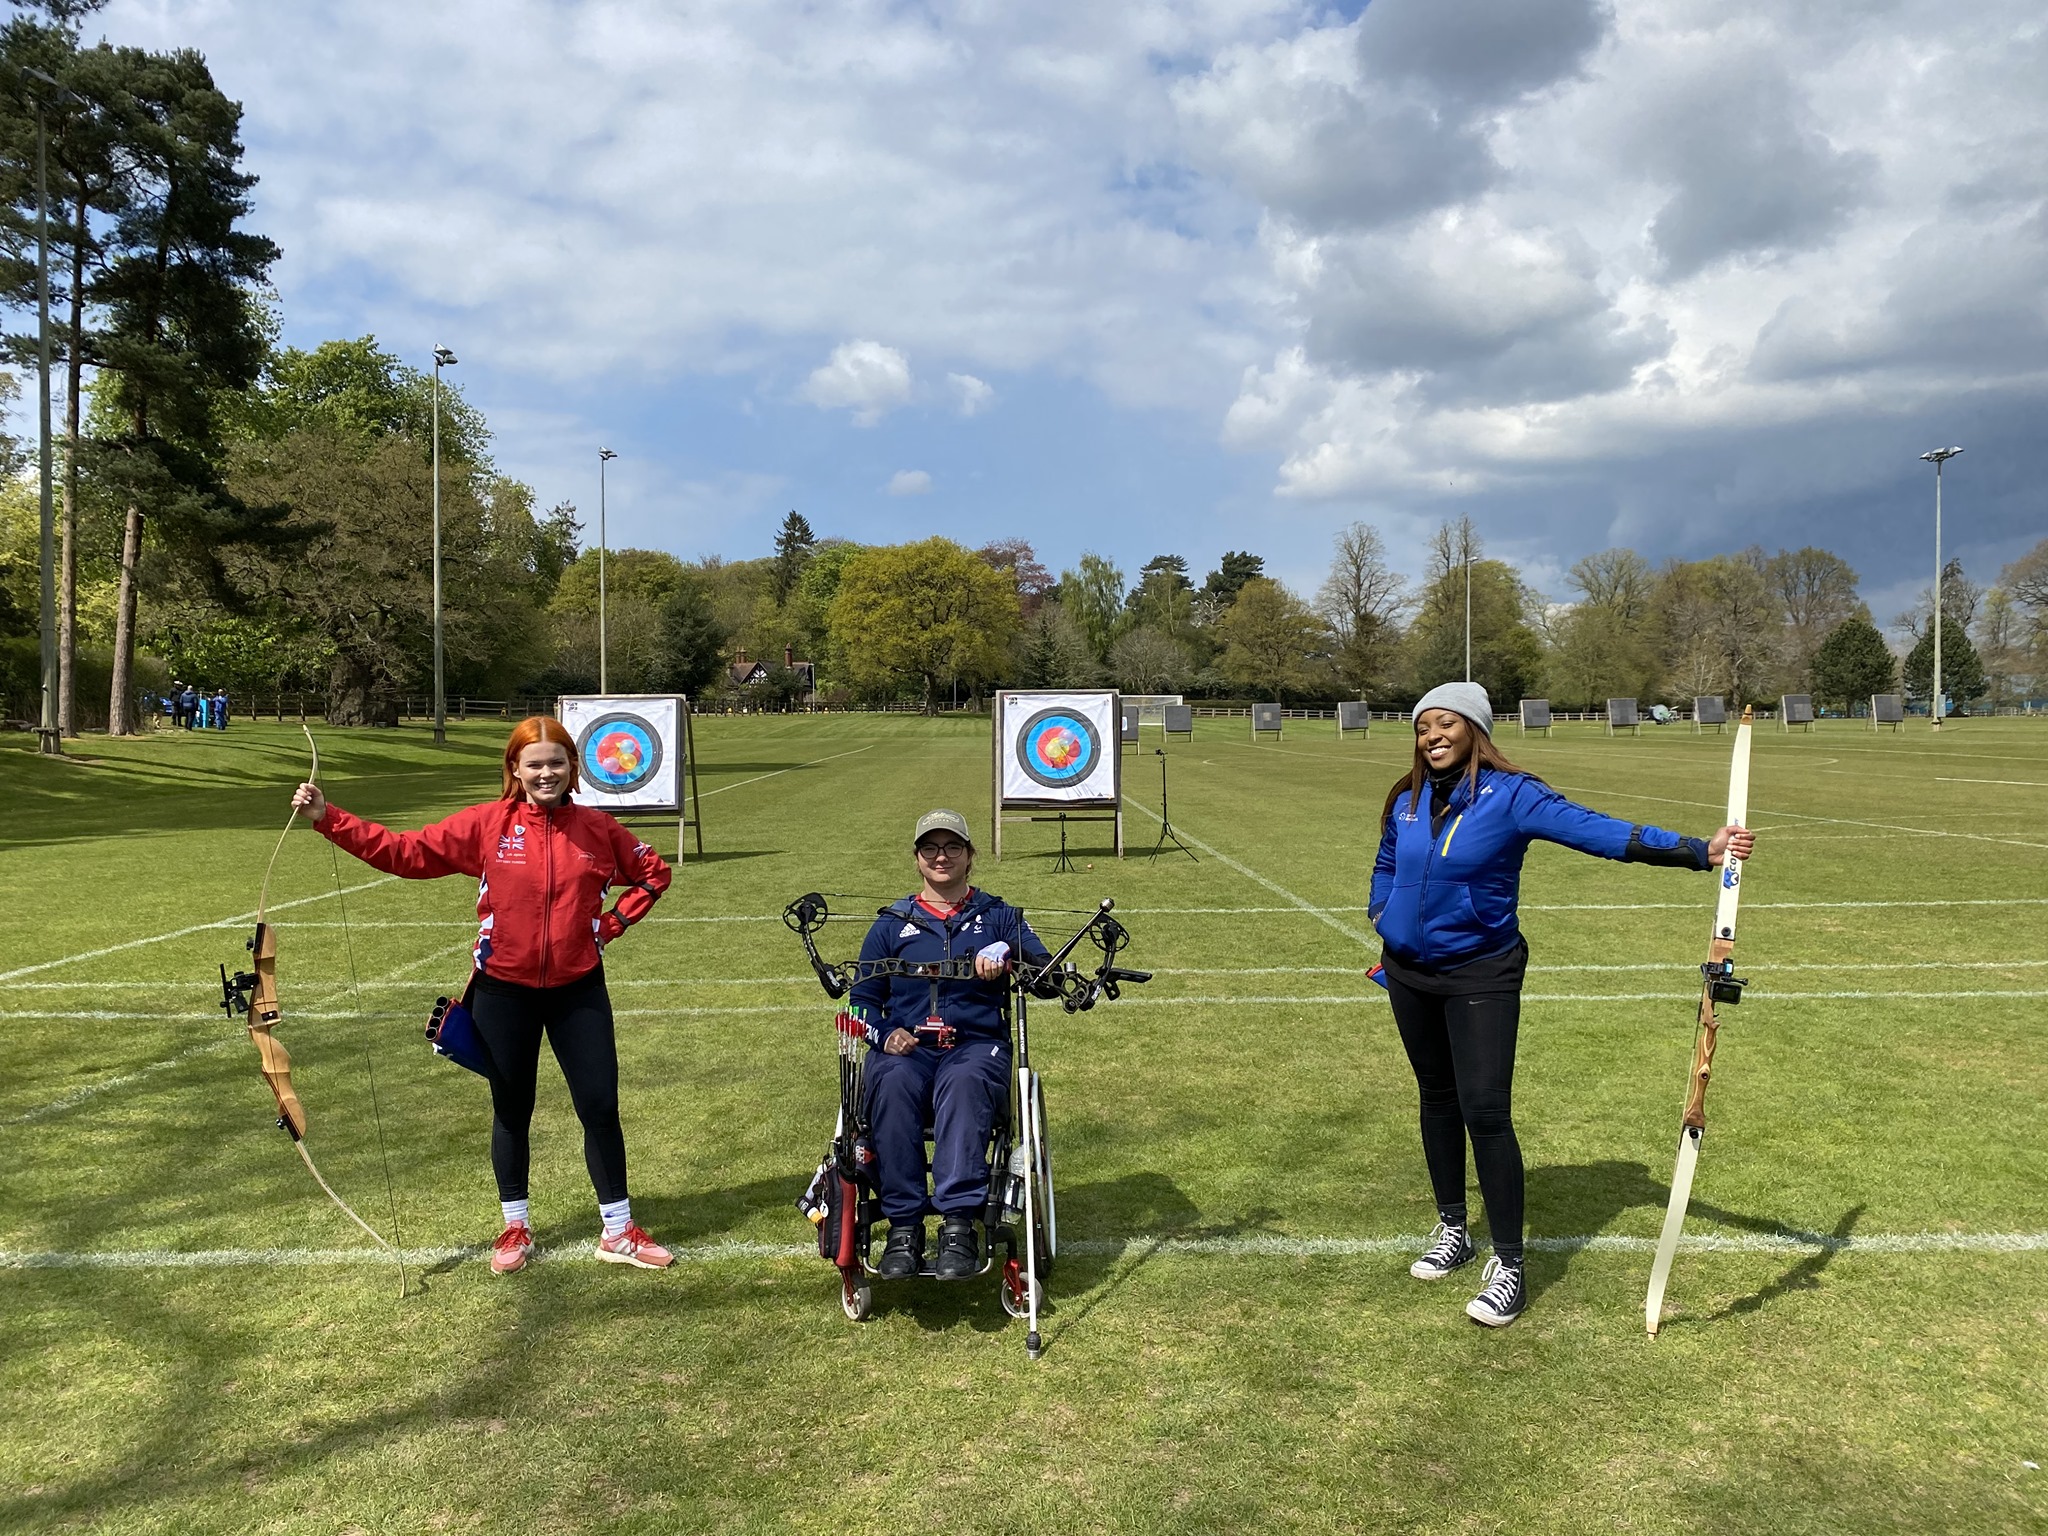 Get The Blue Peter Sport Badge By Trying Archery